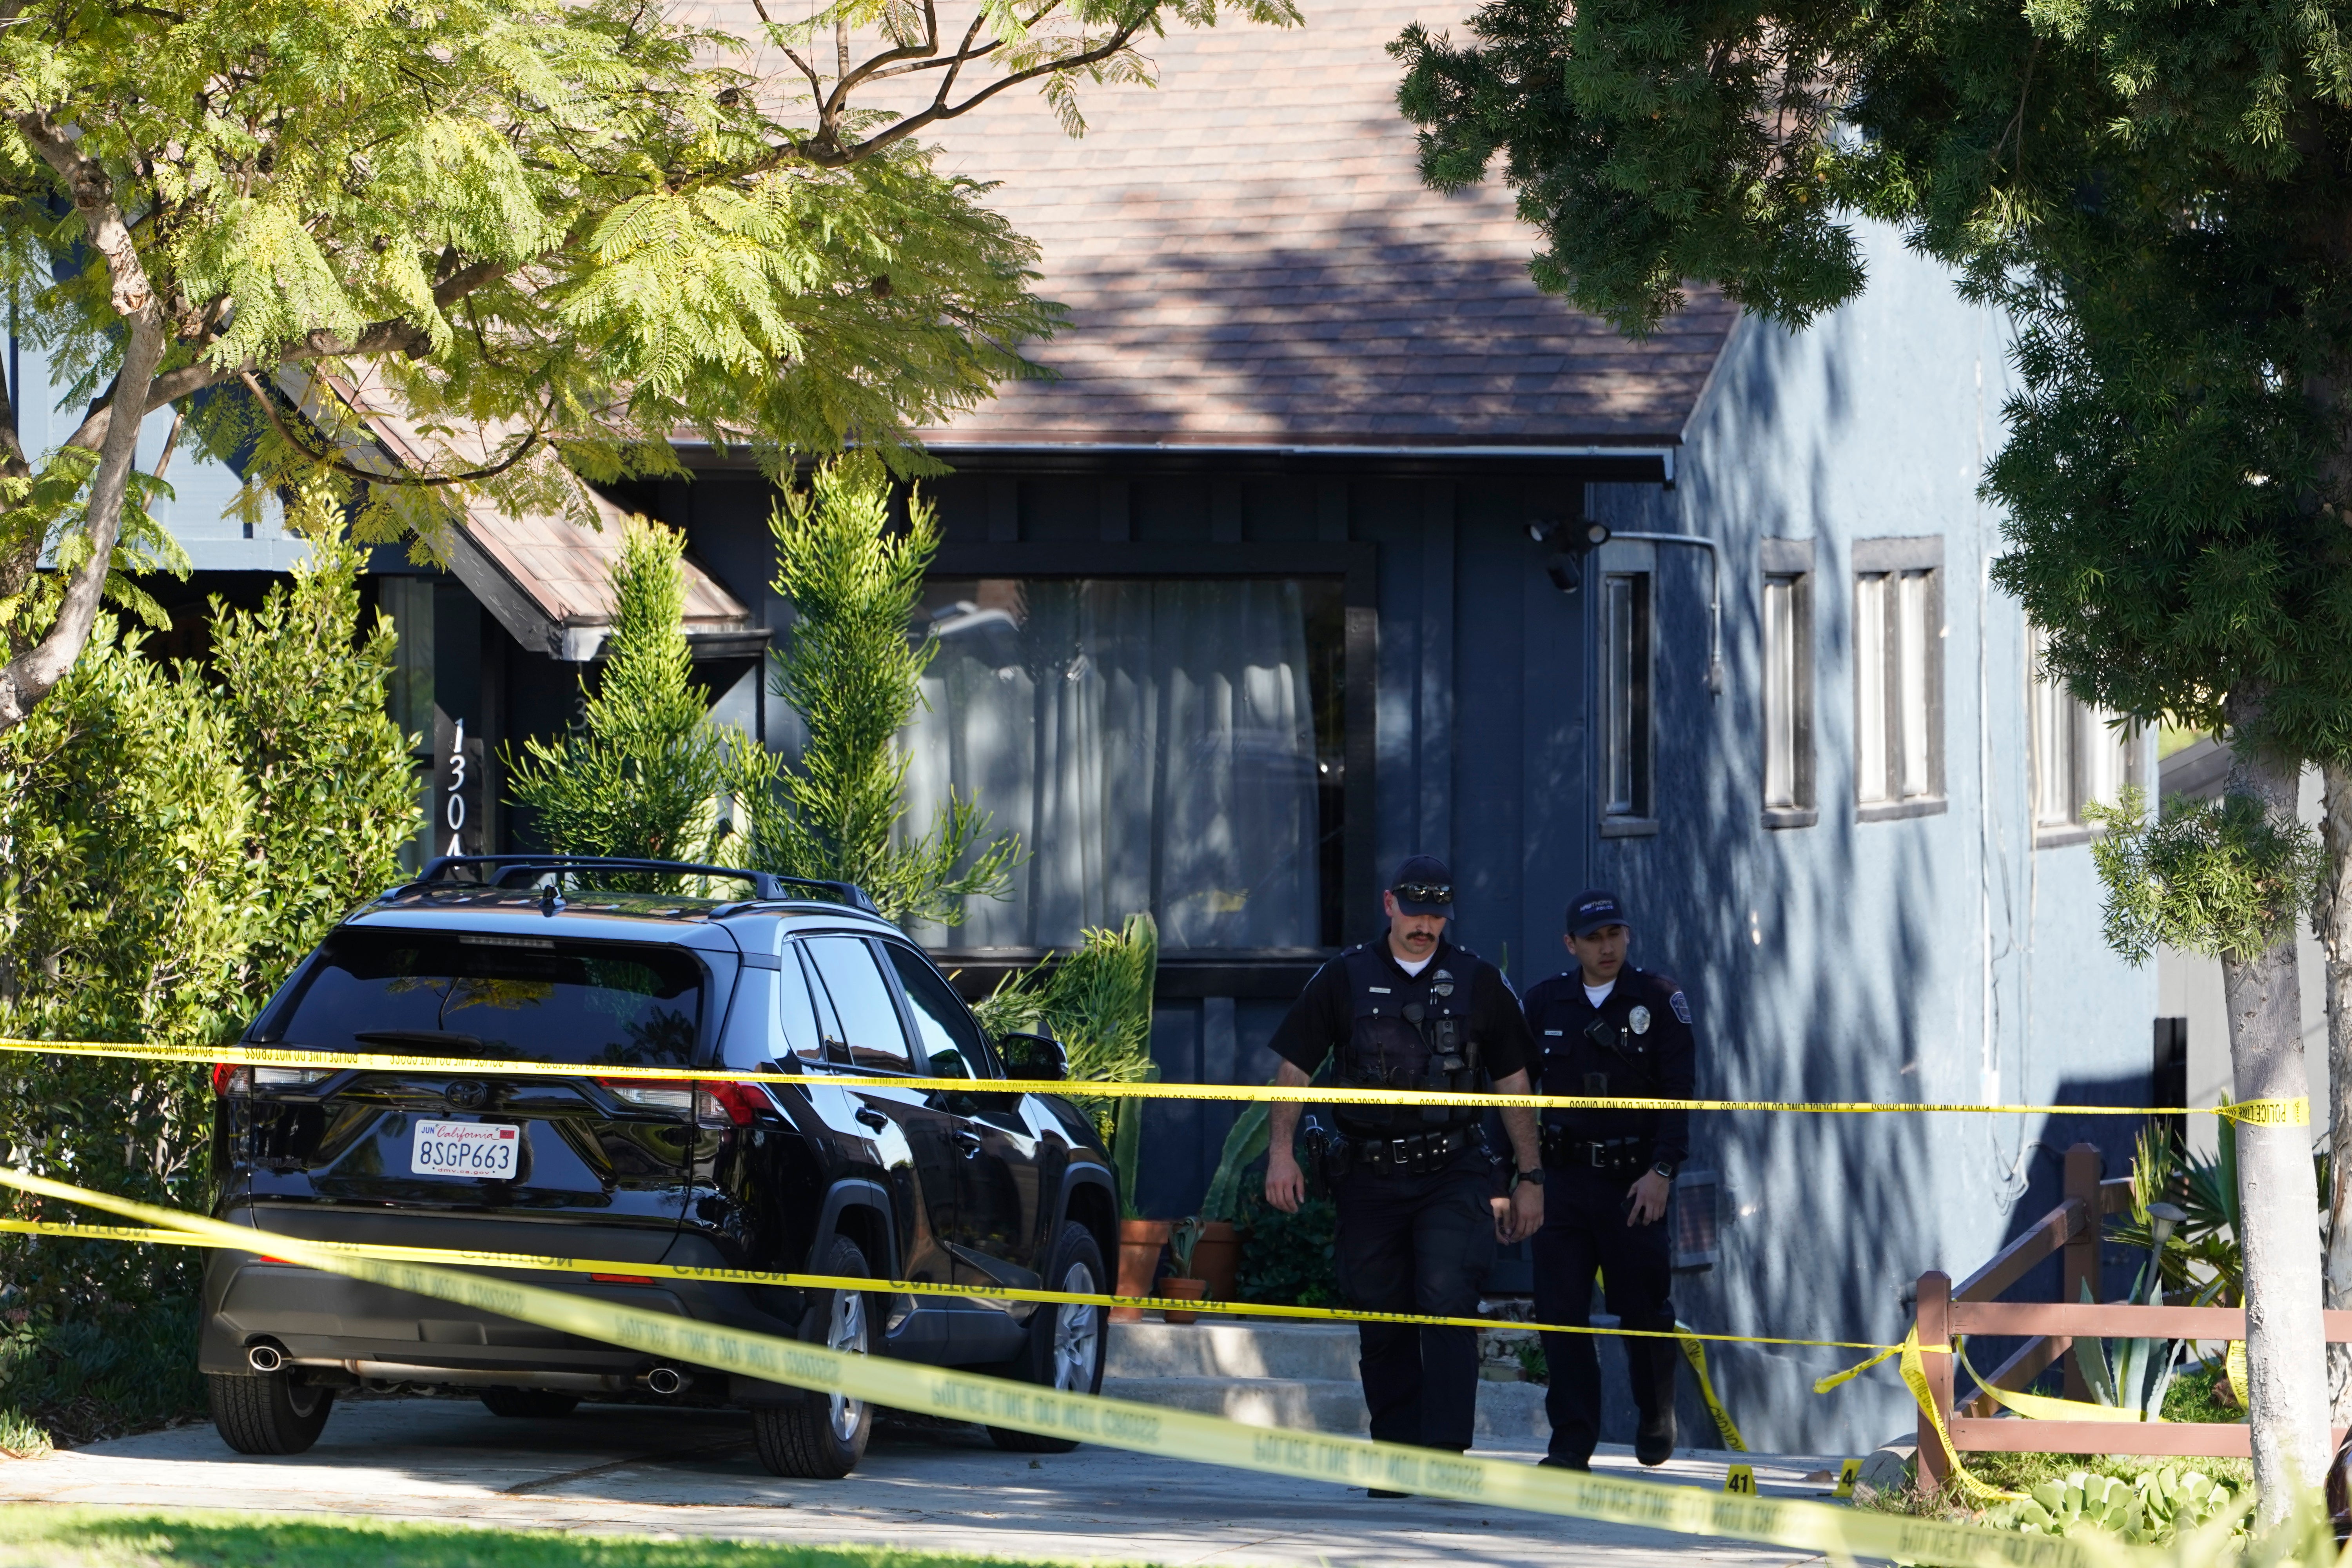 Police investigators leave a crime scene at a home in Inglewood, Calif., on Sunday